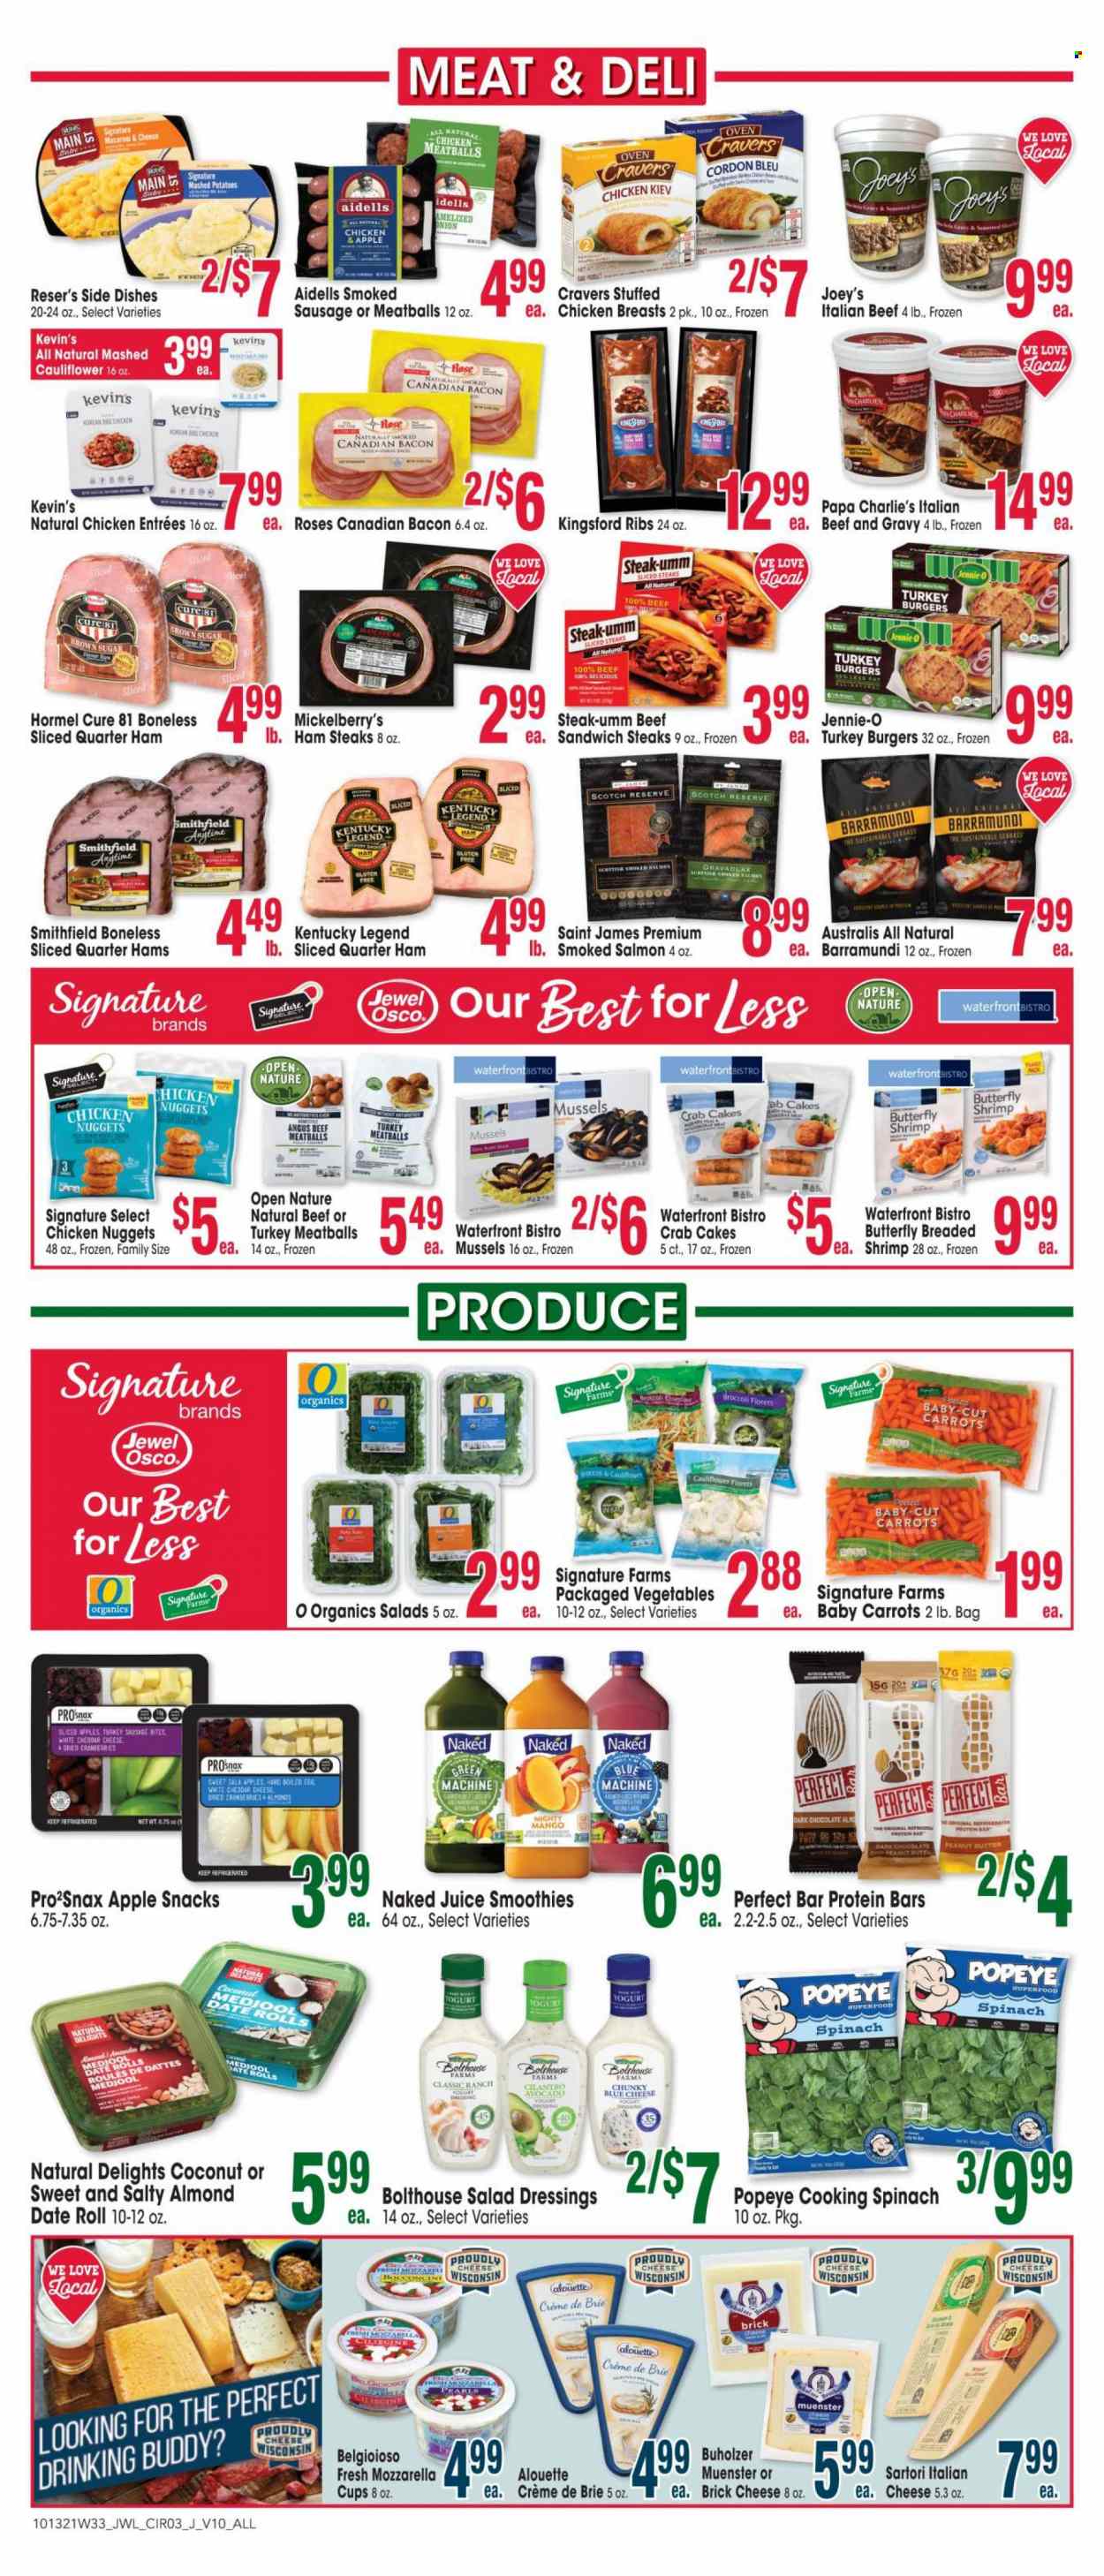 thumbnail - Jewel Osco Flyer - 10/13/2021 - 10/19/2021 - Sales products - broccoli, carrots, spinach, onion, apples, avocado, mango, coconut, barramundi, mussels, salmon, sea bass, smoked salmon, shrimps, crab cake, mashed potatoes, meatballs, sandwich, nuggets, hamburger, chicken nuggets, Hormel, mashed cauliflower, bacon, canadian bacon, ham, sausage, smoked sausage, ham steaks, brick cheese, cheddar, cheese, brie, Münster cheese, yoghurt, cordon bleu, Chicken Kiev, chocolate, snack, dark chocolate, cane sugar, protein bar, cilantro, salad dressing, peanut butter, juice, smoothie, wine, rosé wine, beef meat, steak, turkey burger, cup, rose. Page 3.